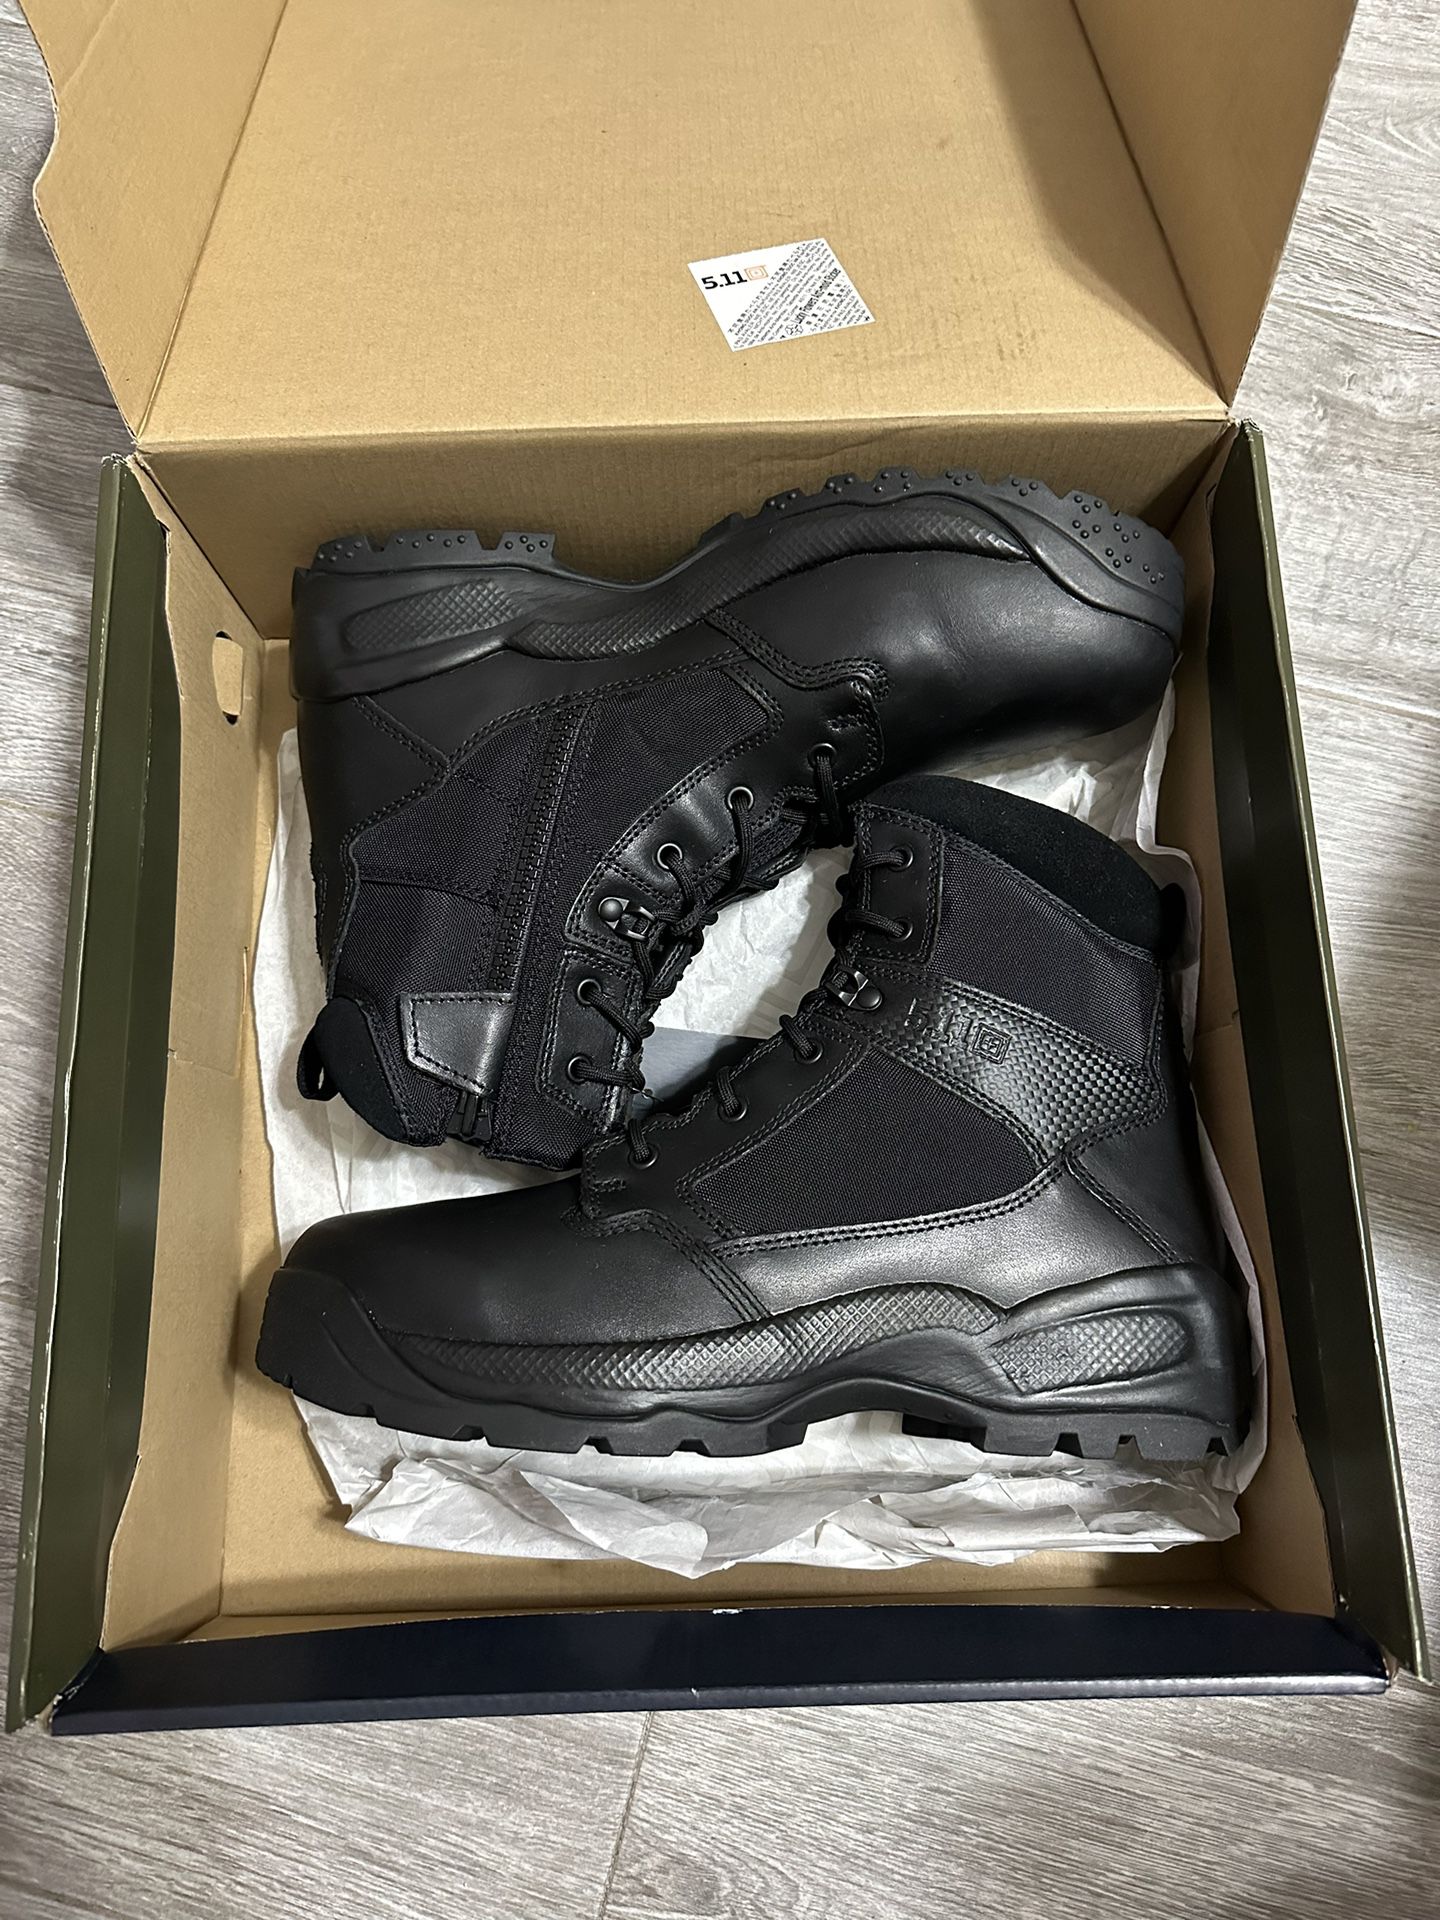 5.11 ATAC 2.0 Boot (Size 13W) 